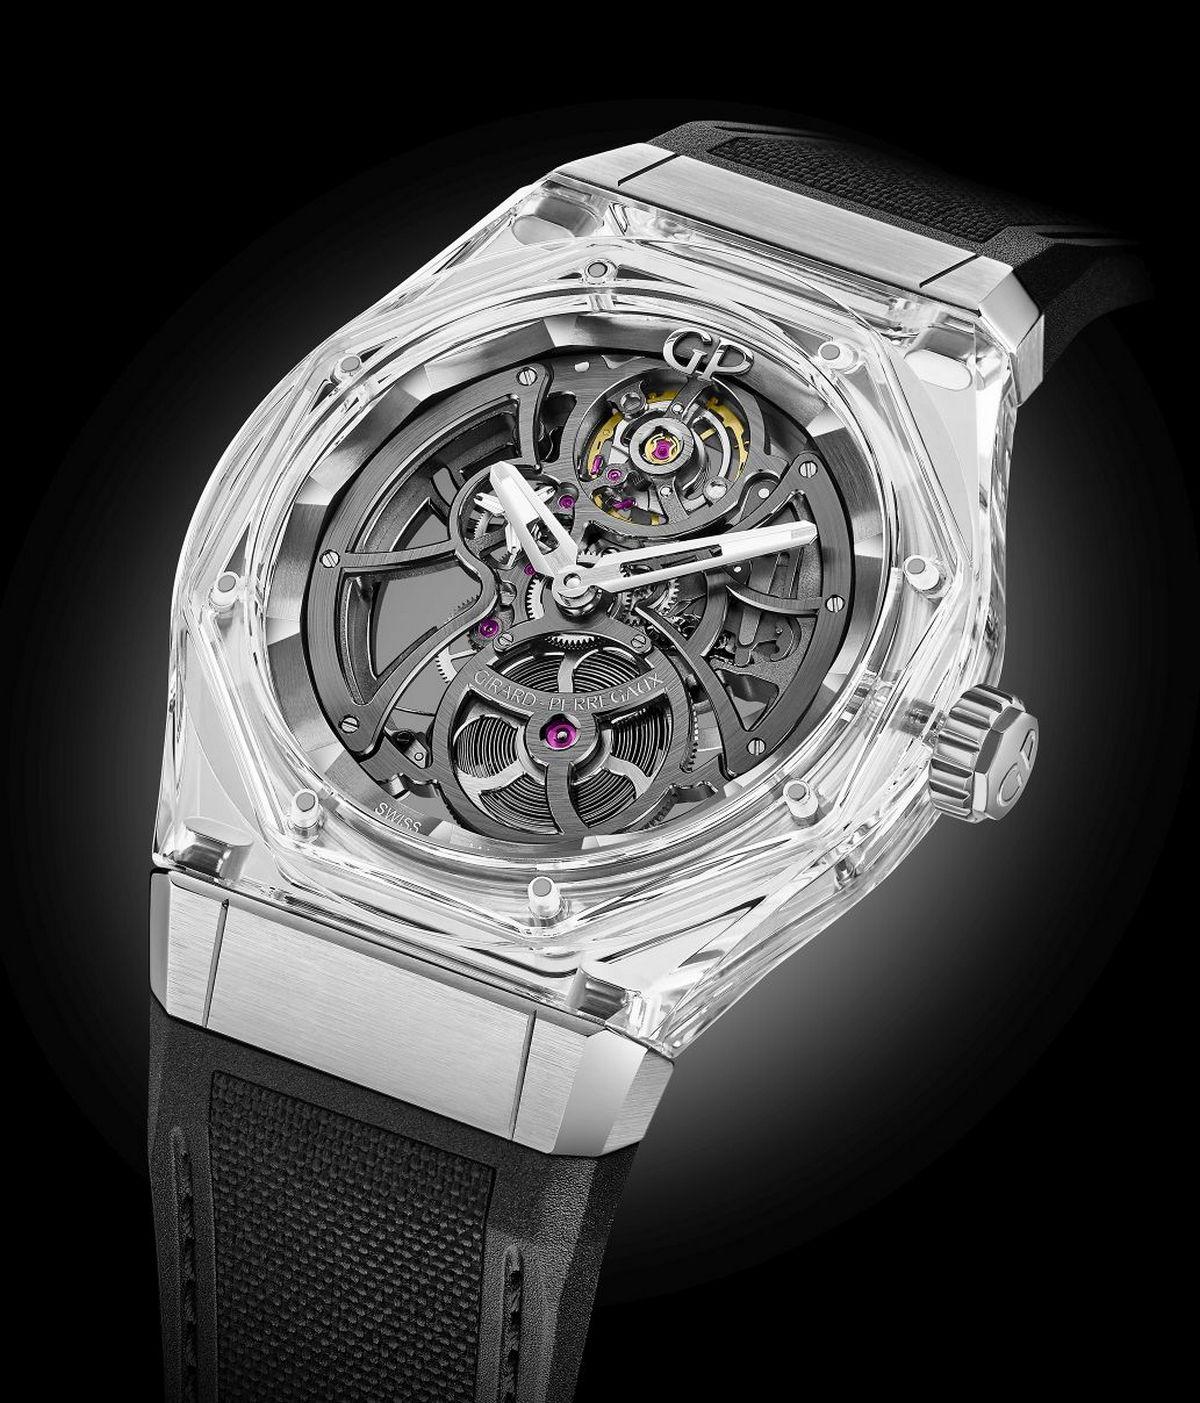 Girard-Perregaux?s Laureato Absolute Light a stunning timepiece that takes transparency to the next level